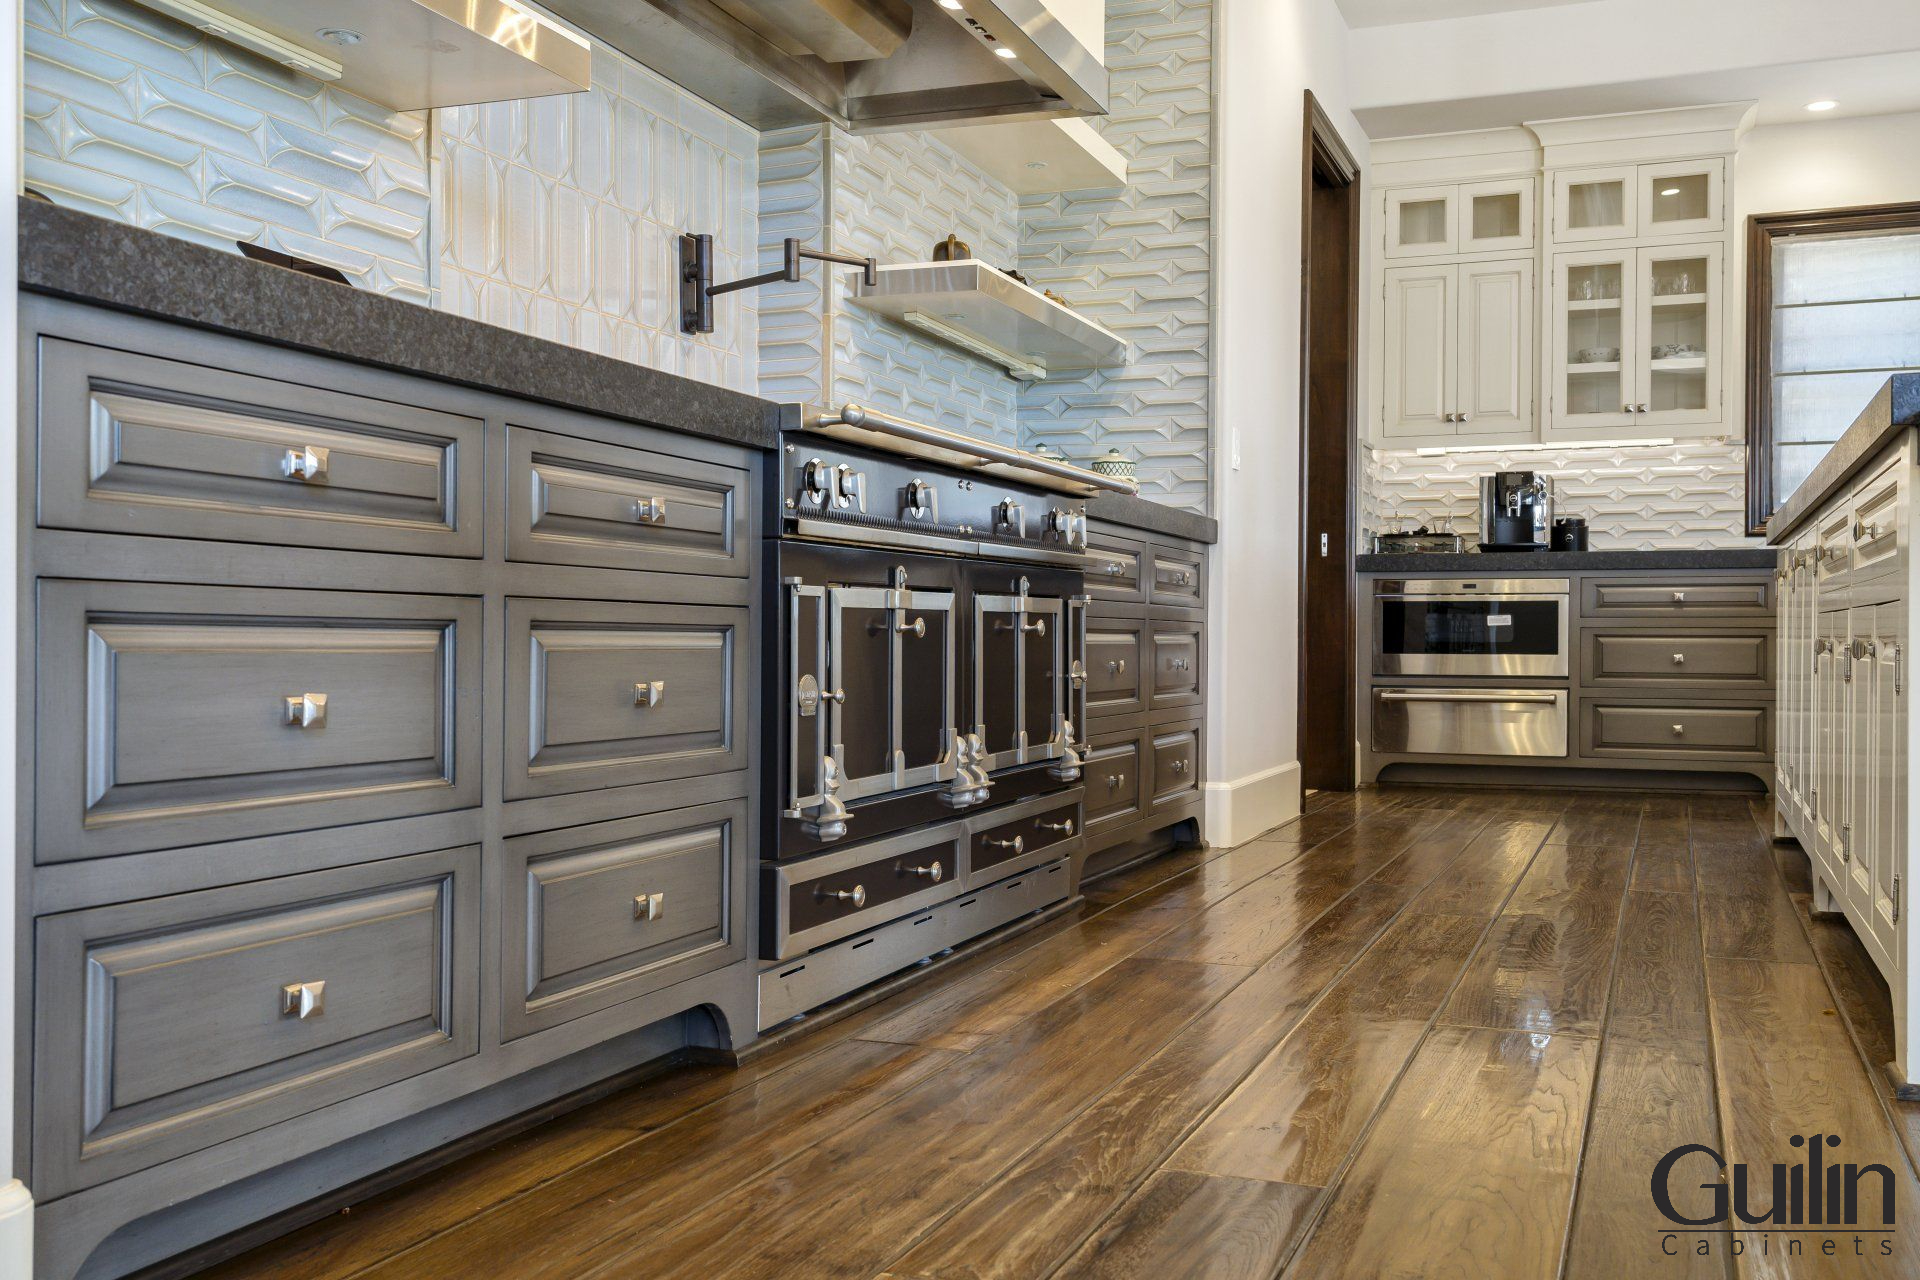 Our Remodeled Project Image is a example for The finishes and materials you choose for your custom cabinets may influence the look and feel of the space in a big way.